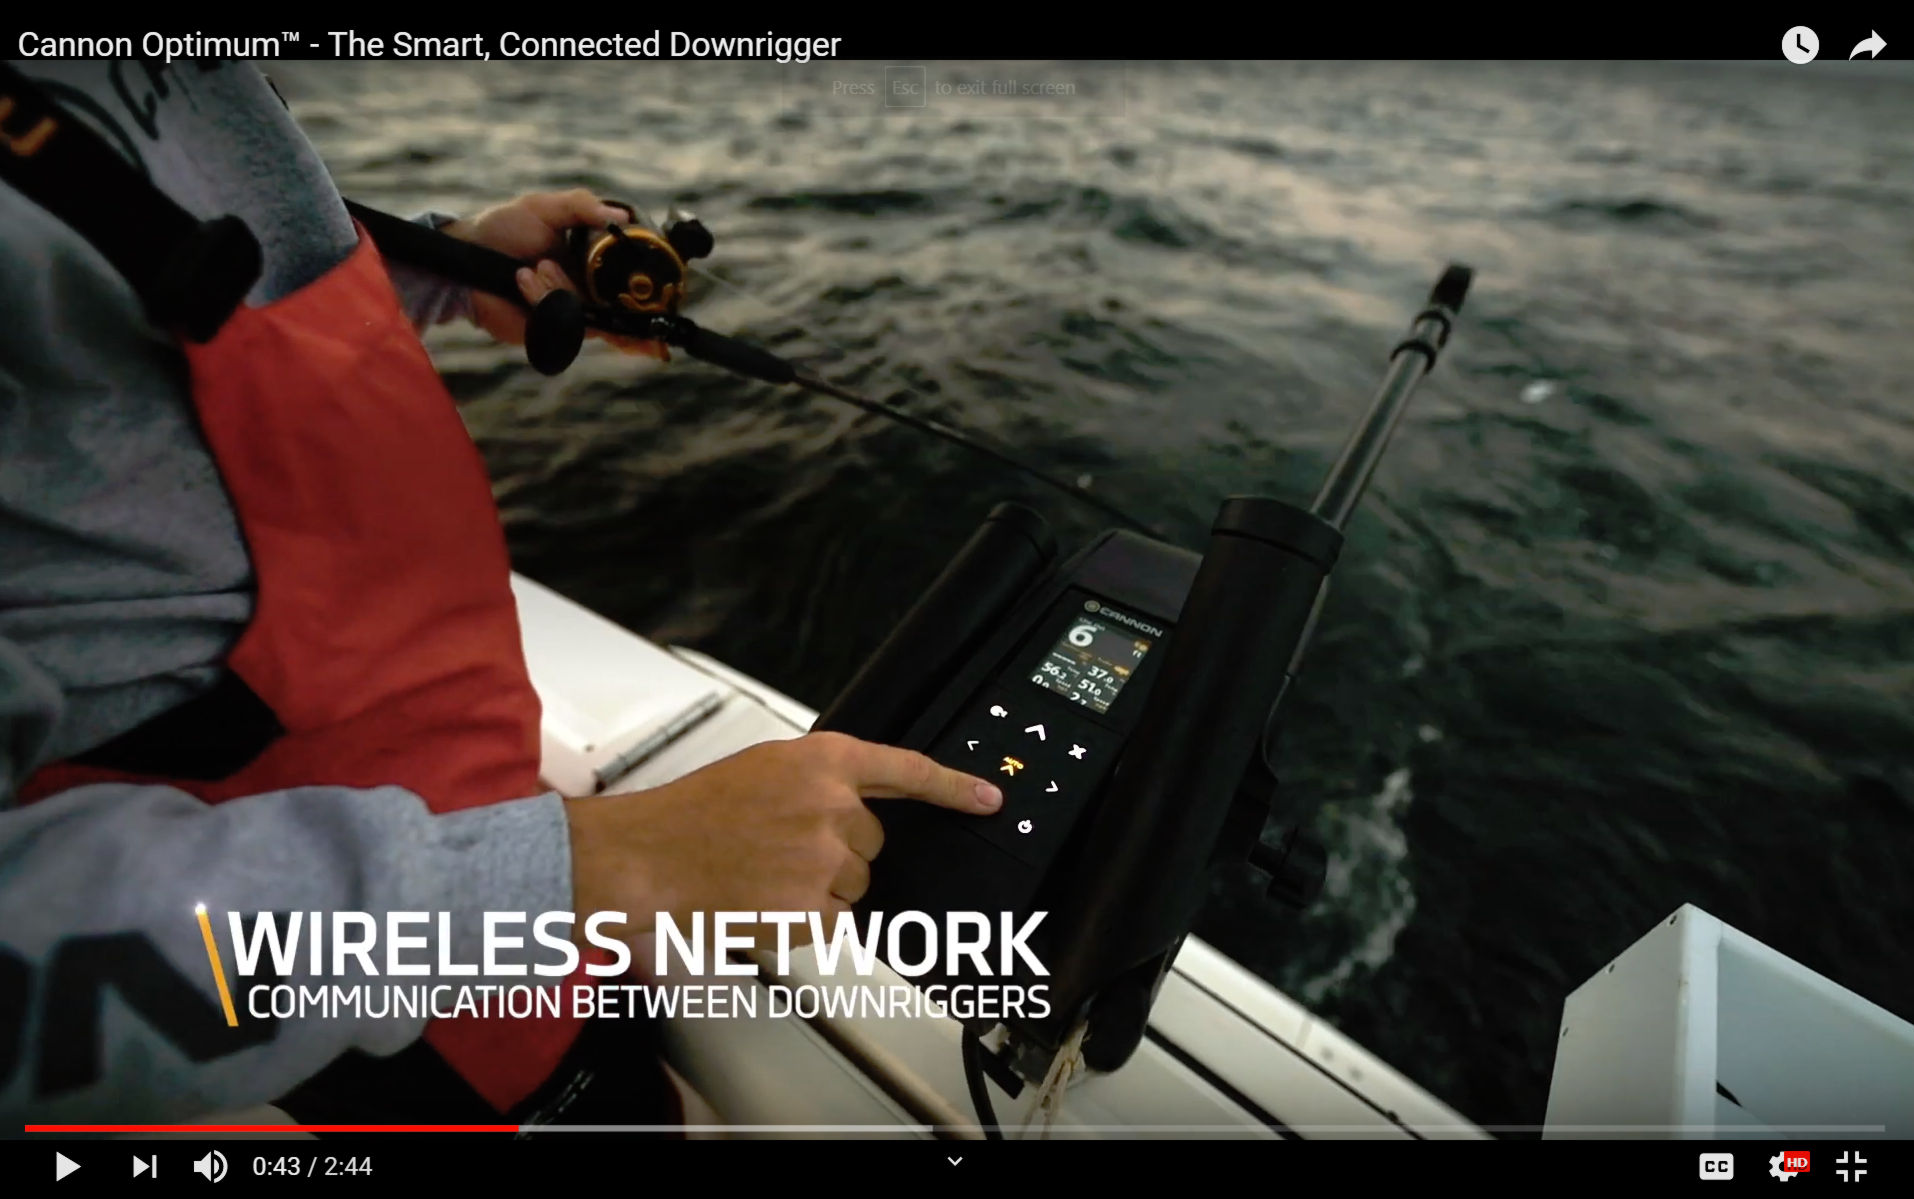 Cannon Modernizes Downrigger Technology with Connected Optimum